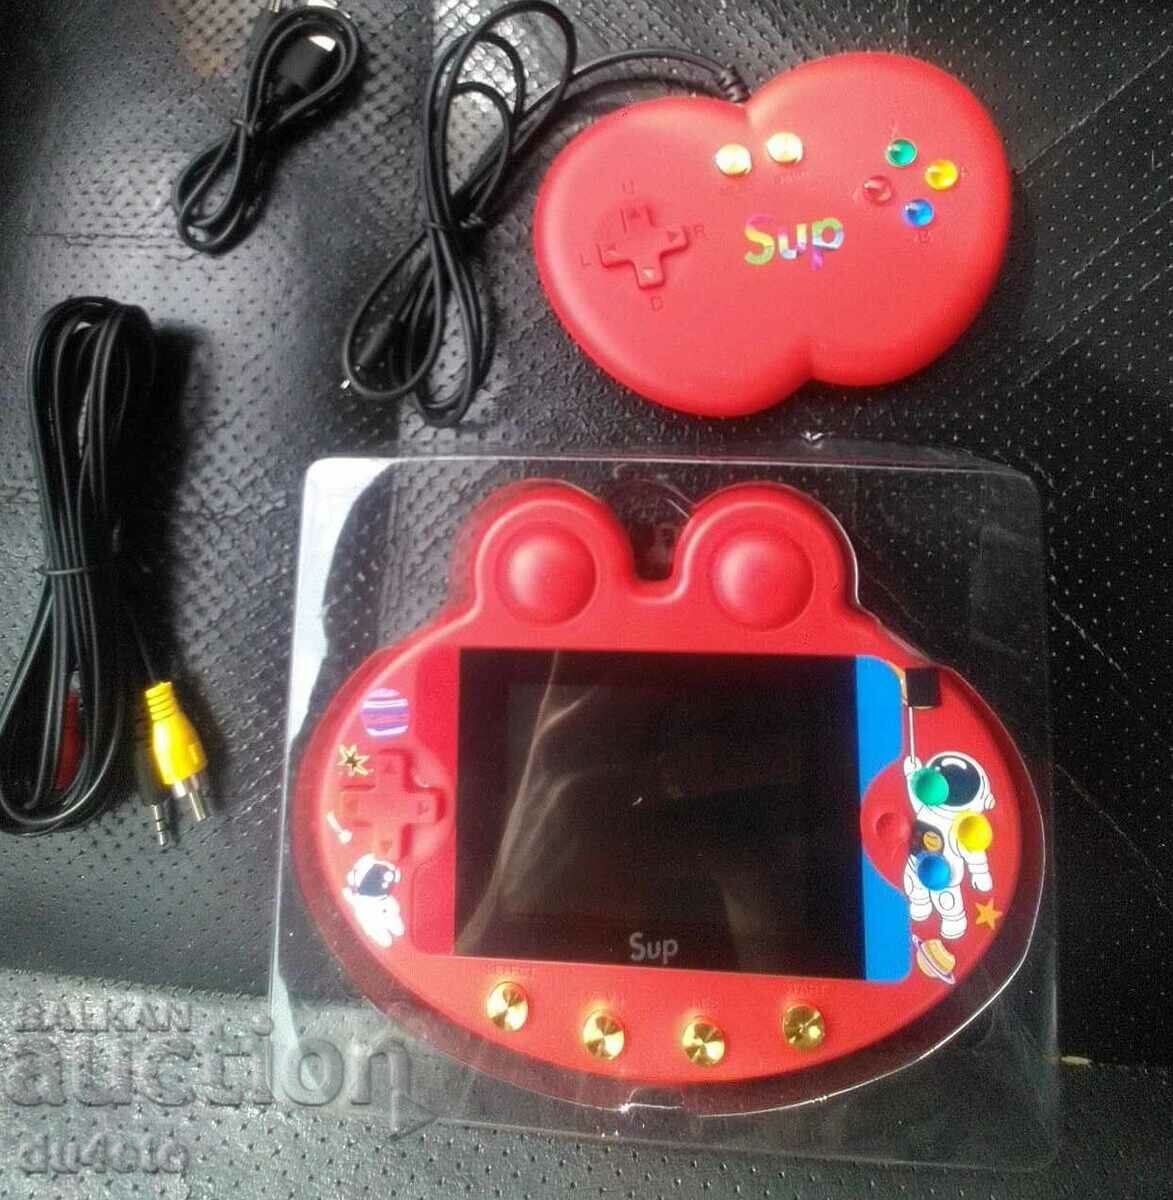 Gaming console SUP F4 game pad box children's console with 500 ret